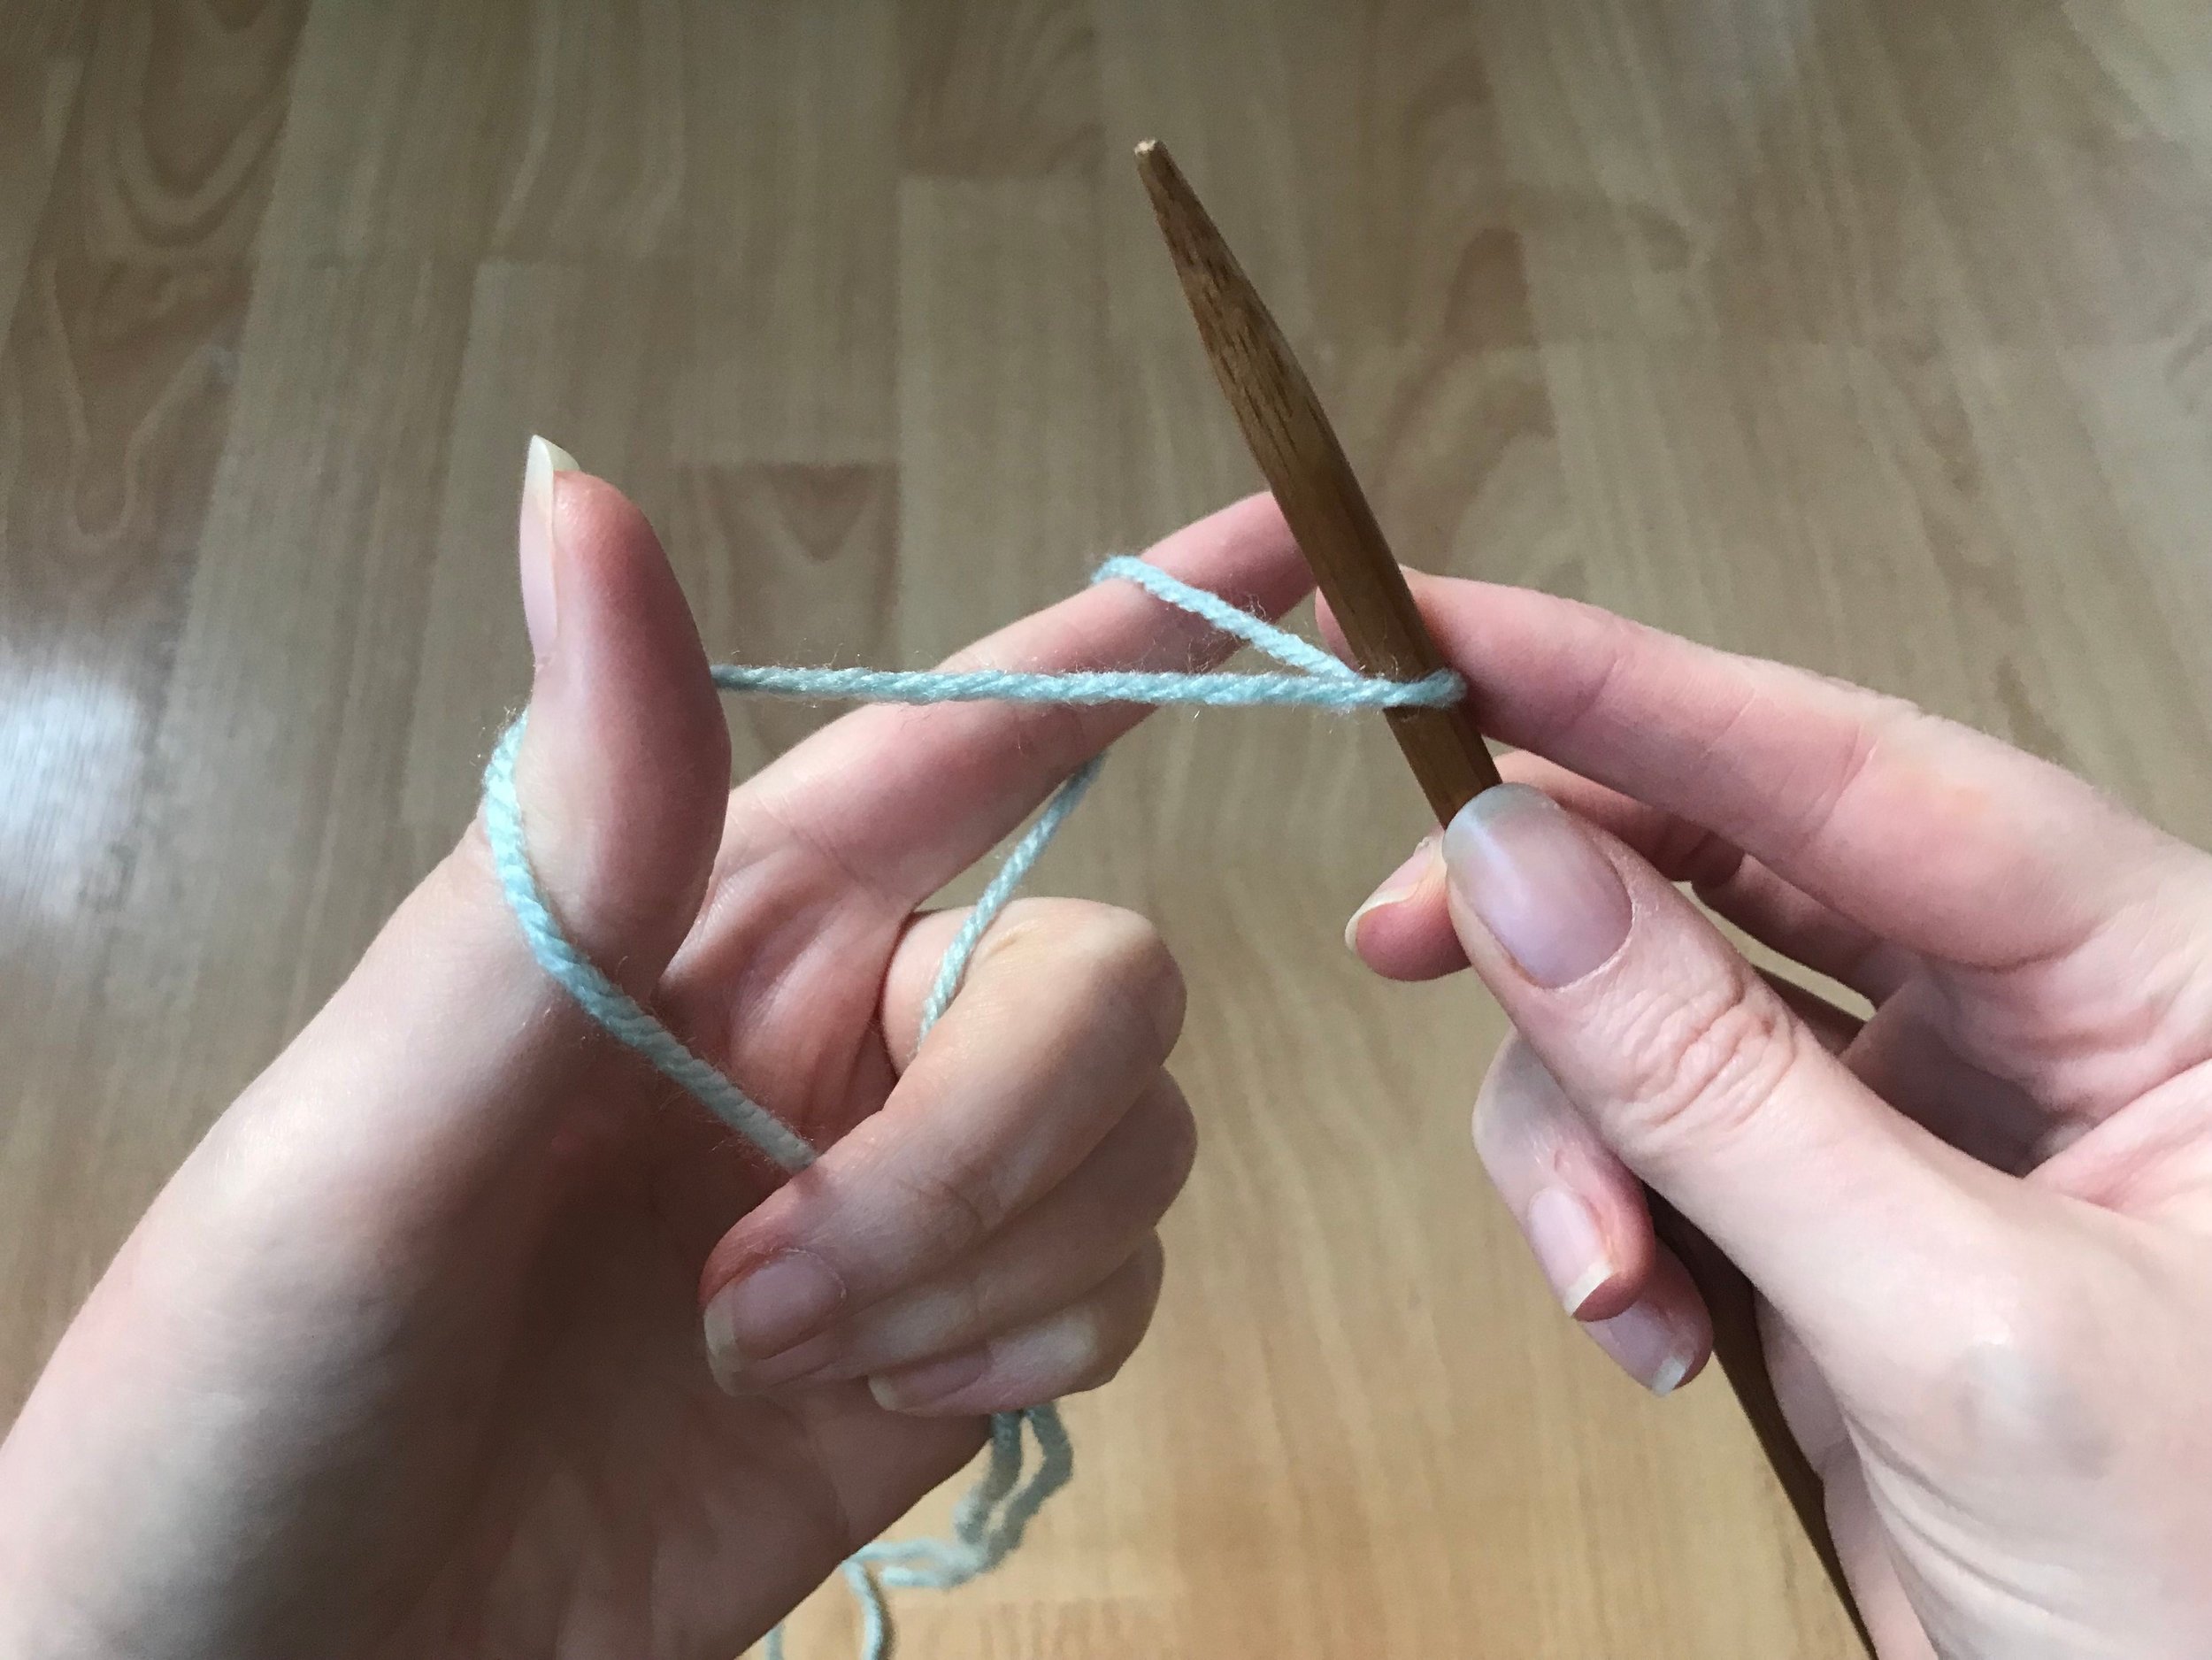 Circular Knitting Needles for Beginners part 1: How to do the Long Tail  Cast On 